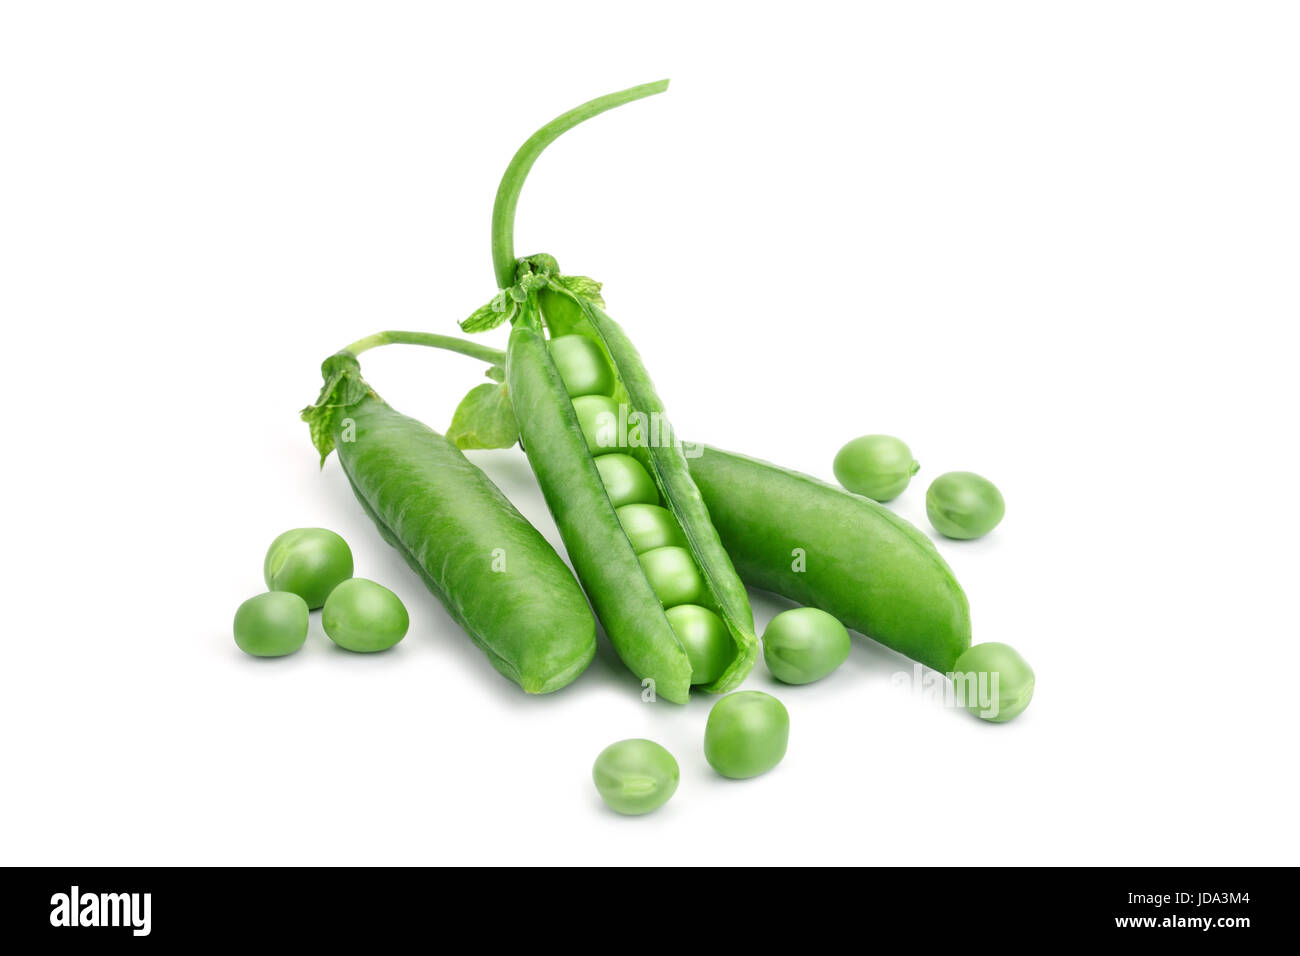 Ripe green peas on a white background. An isolated object. Macro. Stock Photo